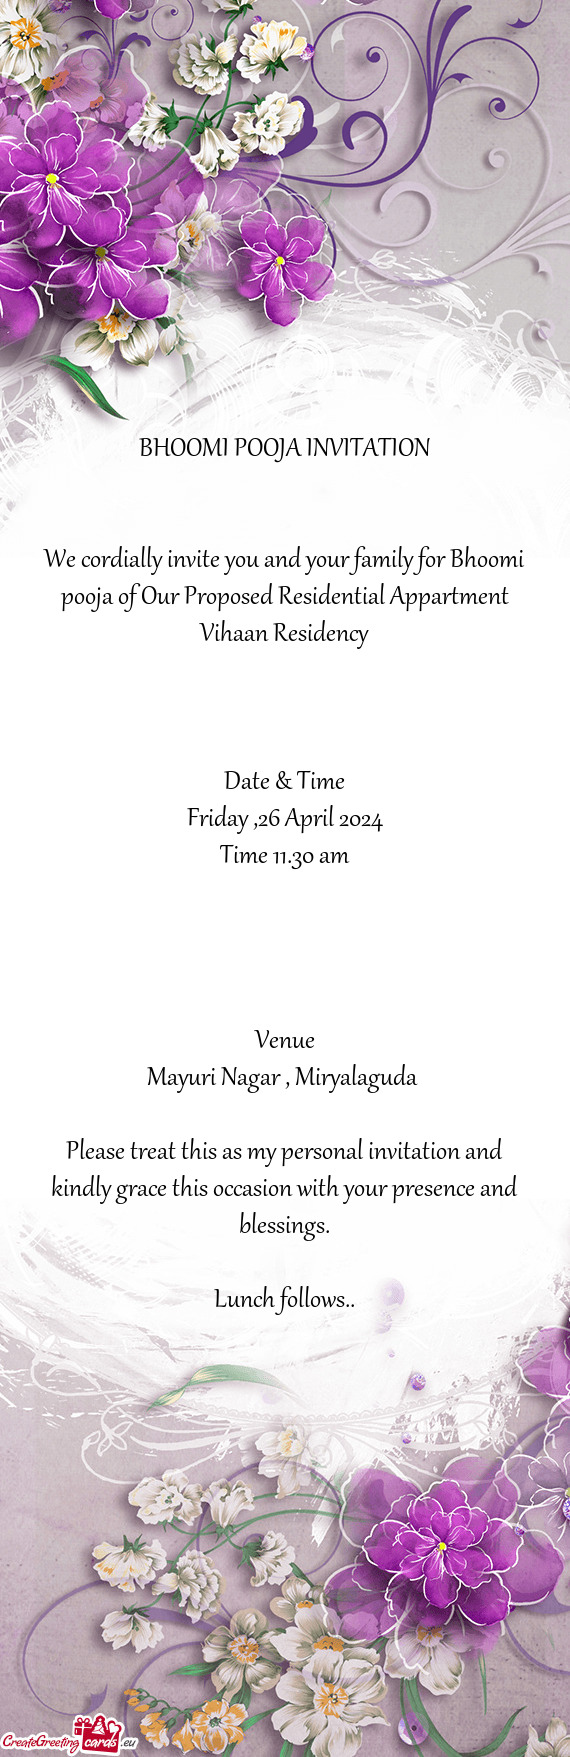 We cordially invite you and your family for Bhoomi pooja of Our Proposed Residential Appartment Viha